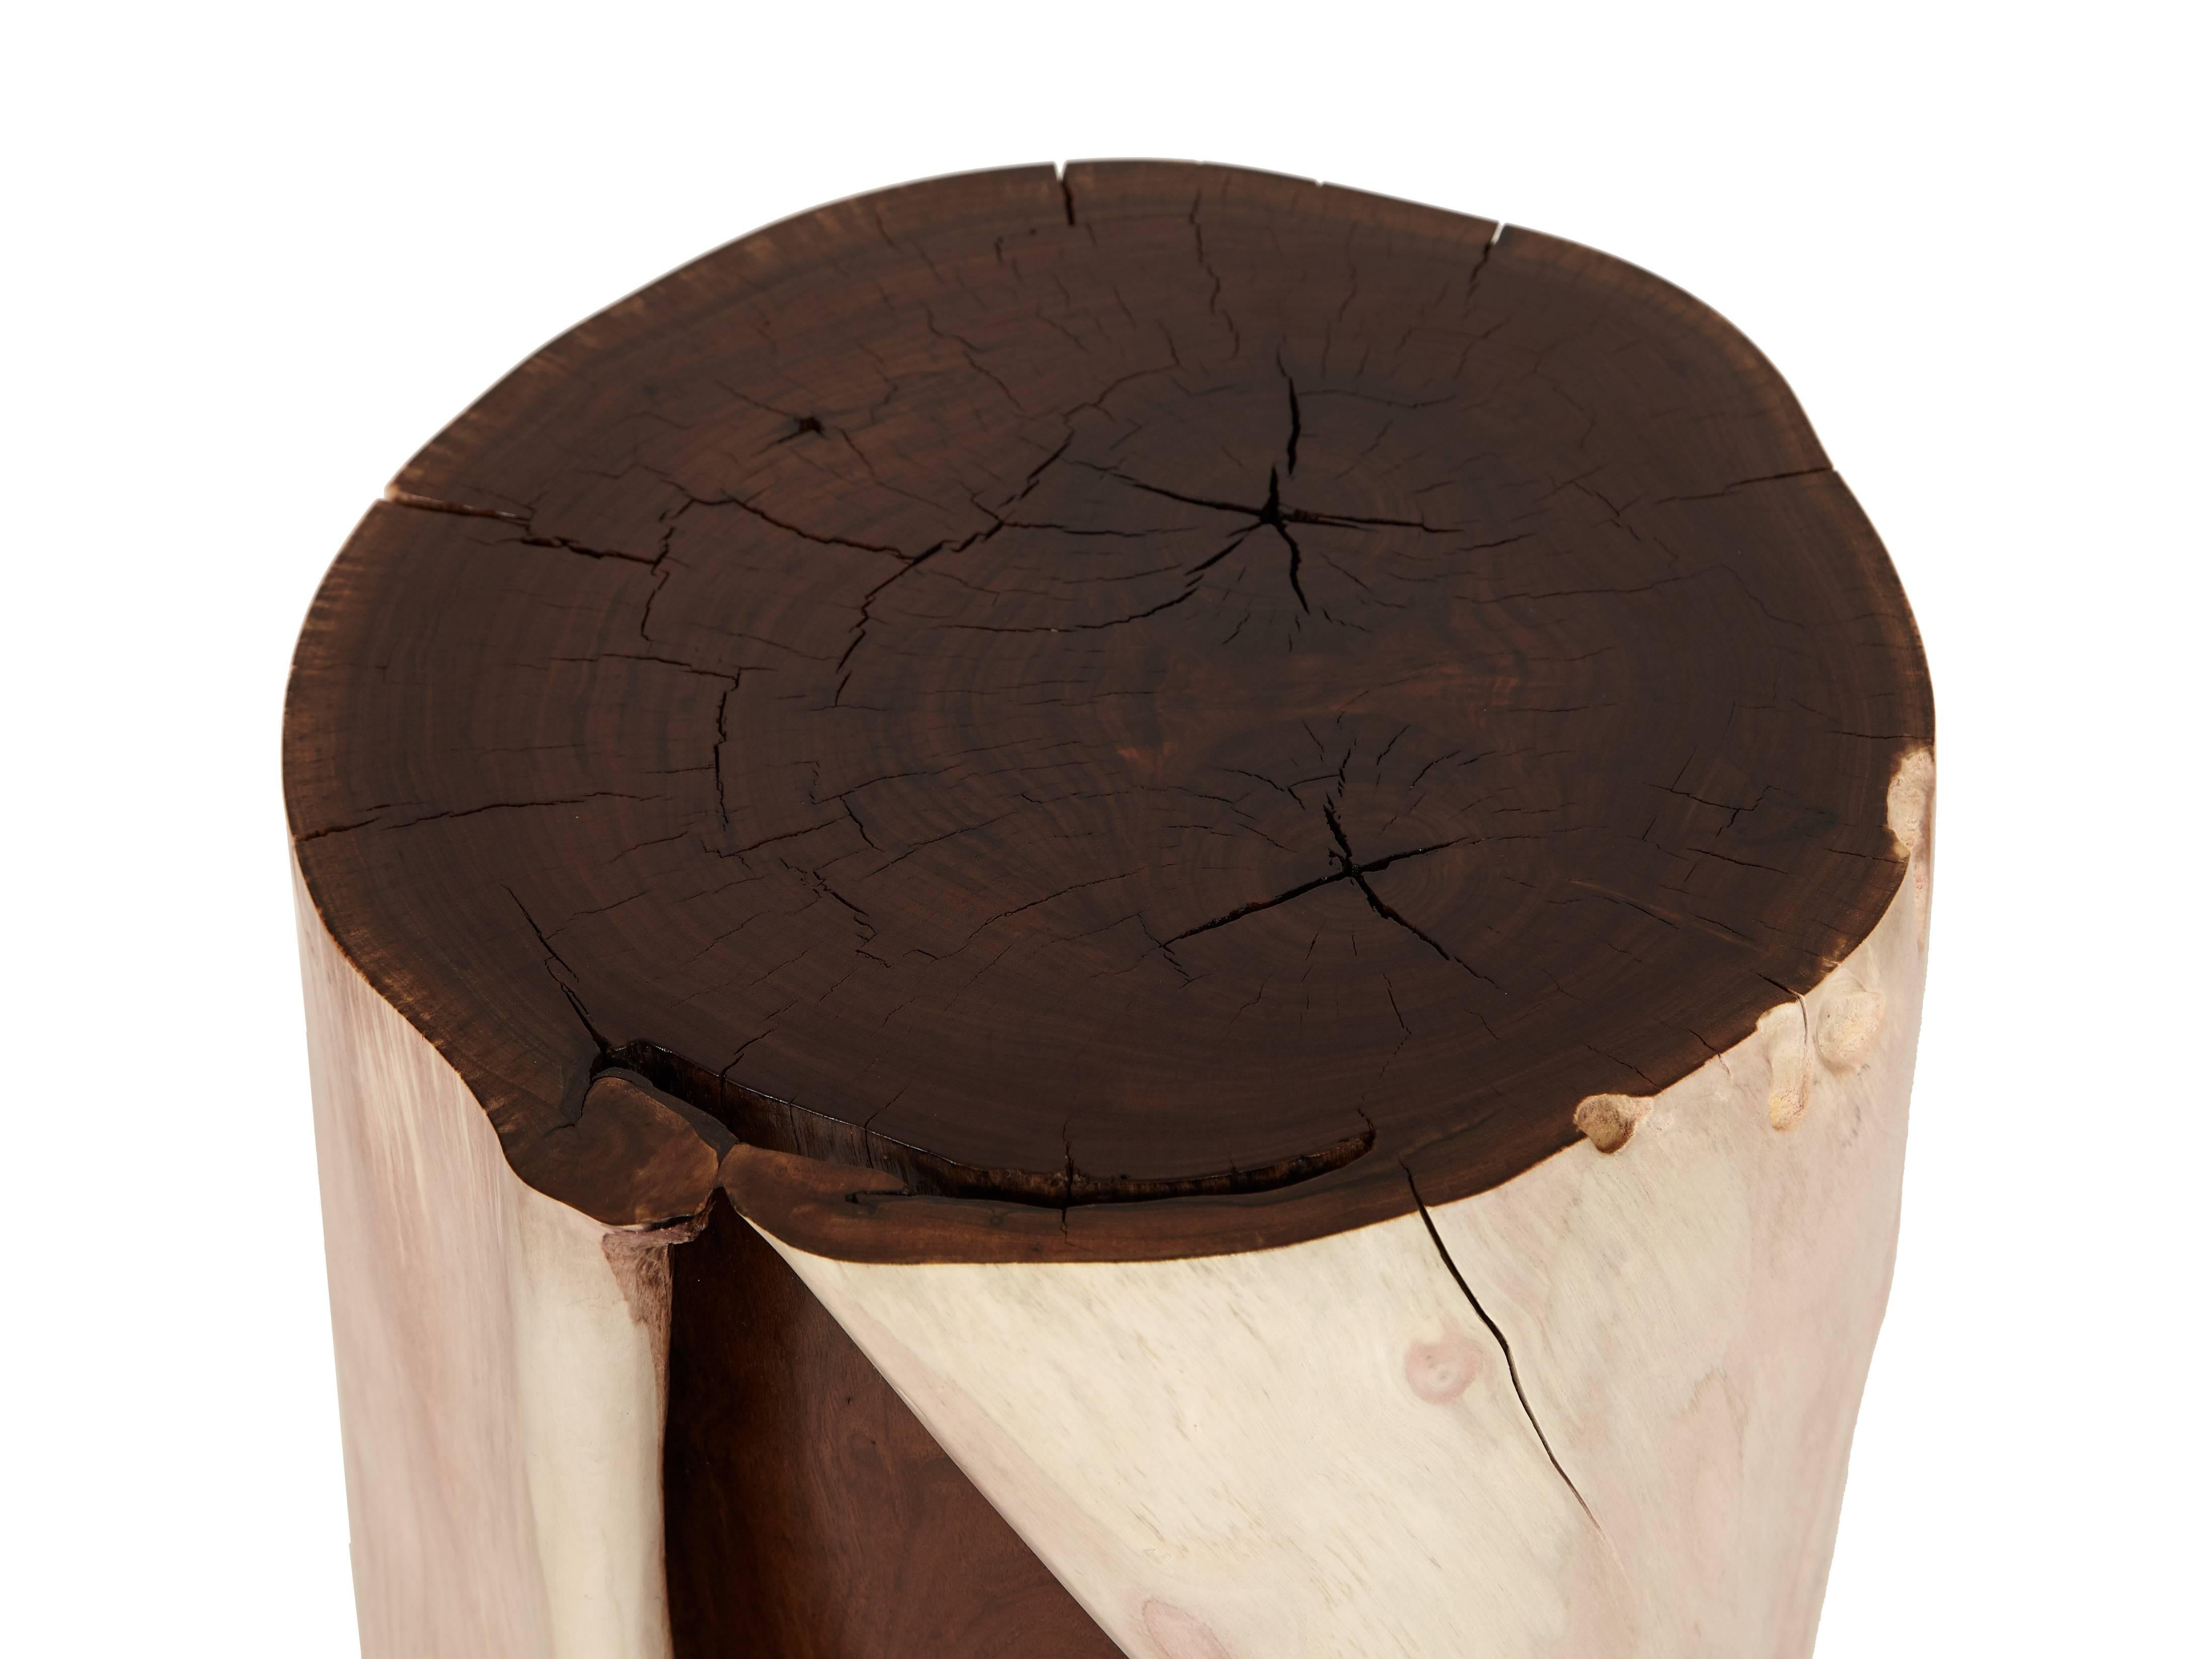 Split walnut table /stool by Caleb Woodard from solid and bleached walnut, circa 2017. Hand-carved highly sculpted organic form kiln dried to control splitting over time finished with a white oil hand rubbed finish.

Caleb Woodard is a designer